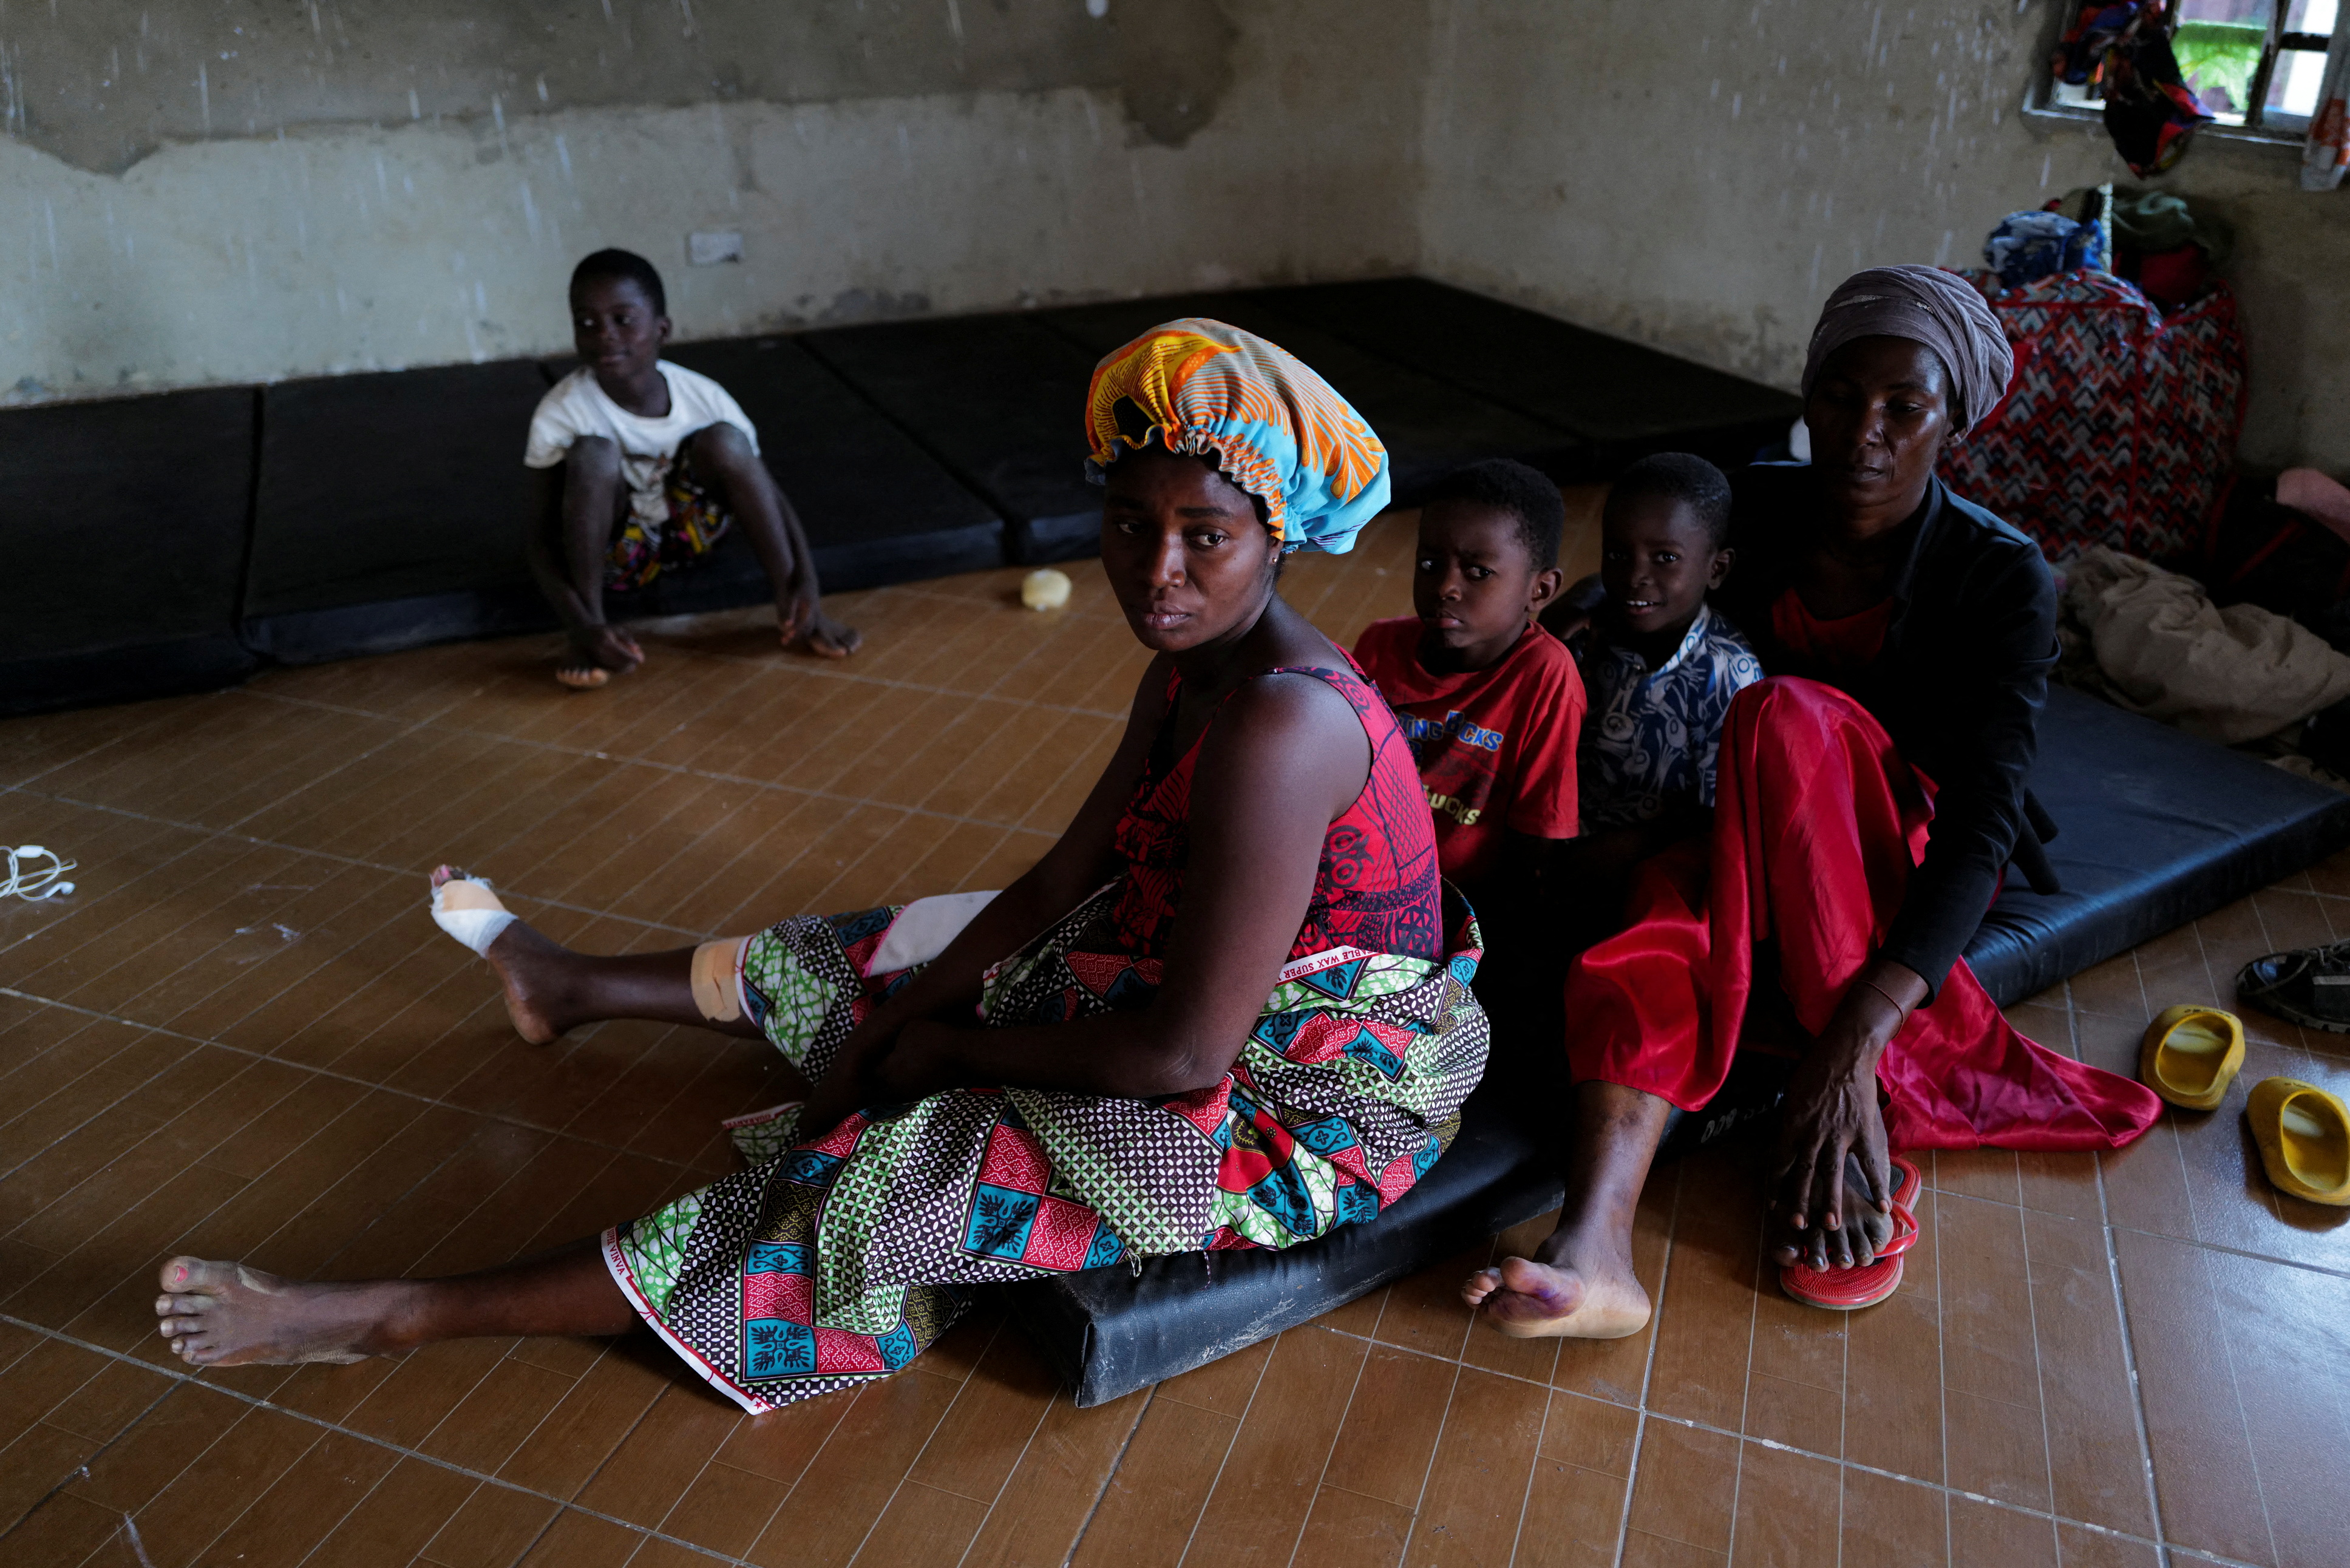 Diana Essandoh, 25, whose husband died in an explosion when carrying mining explosives detonated along a road in Apiate, sits with her children and mother-in-law, at a shelter for displaced victims in Bogoso